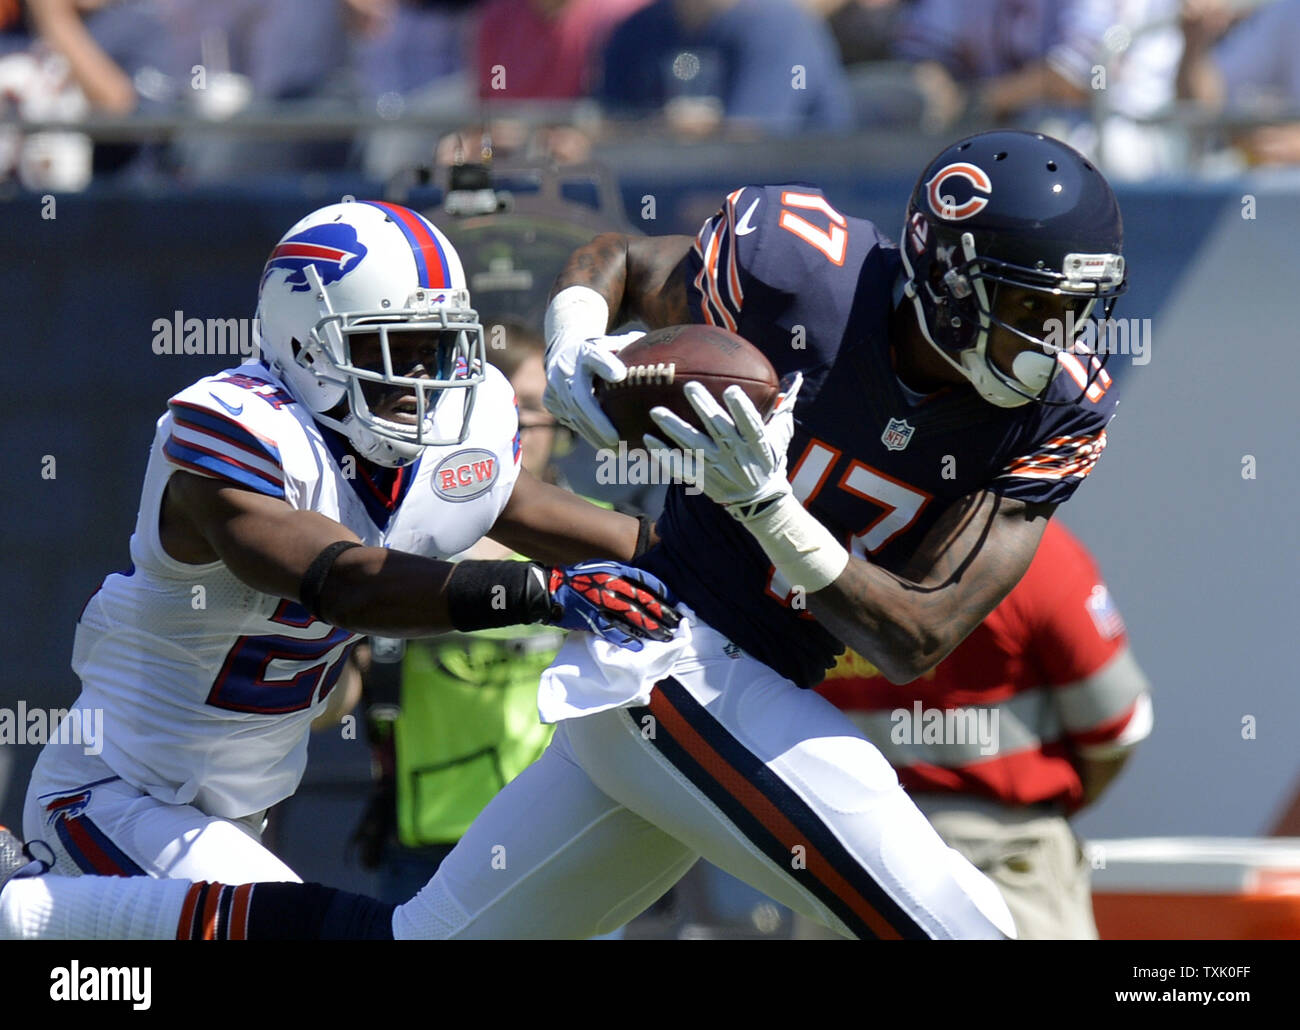 Chicago Bears wide receiver Alshon Jeffery (R) hauls in a 44-yard reception as Buffalo Bills cornerback Leodis McKelvin defends during the first quarter at Soldier Field on September 7, 2014 in Chicago.     UPI/Brian Kersey Stock Photo